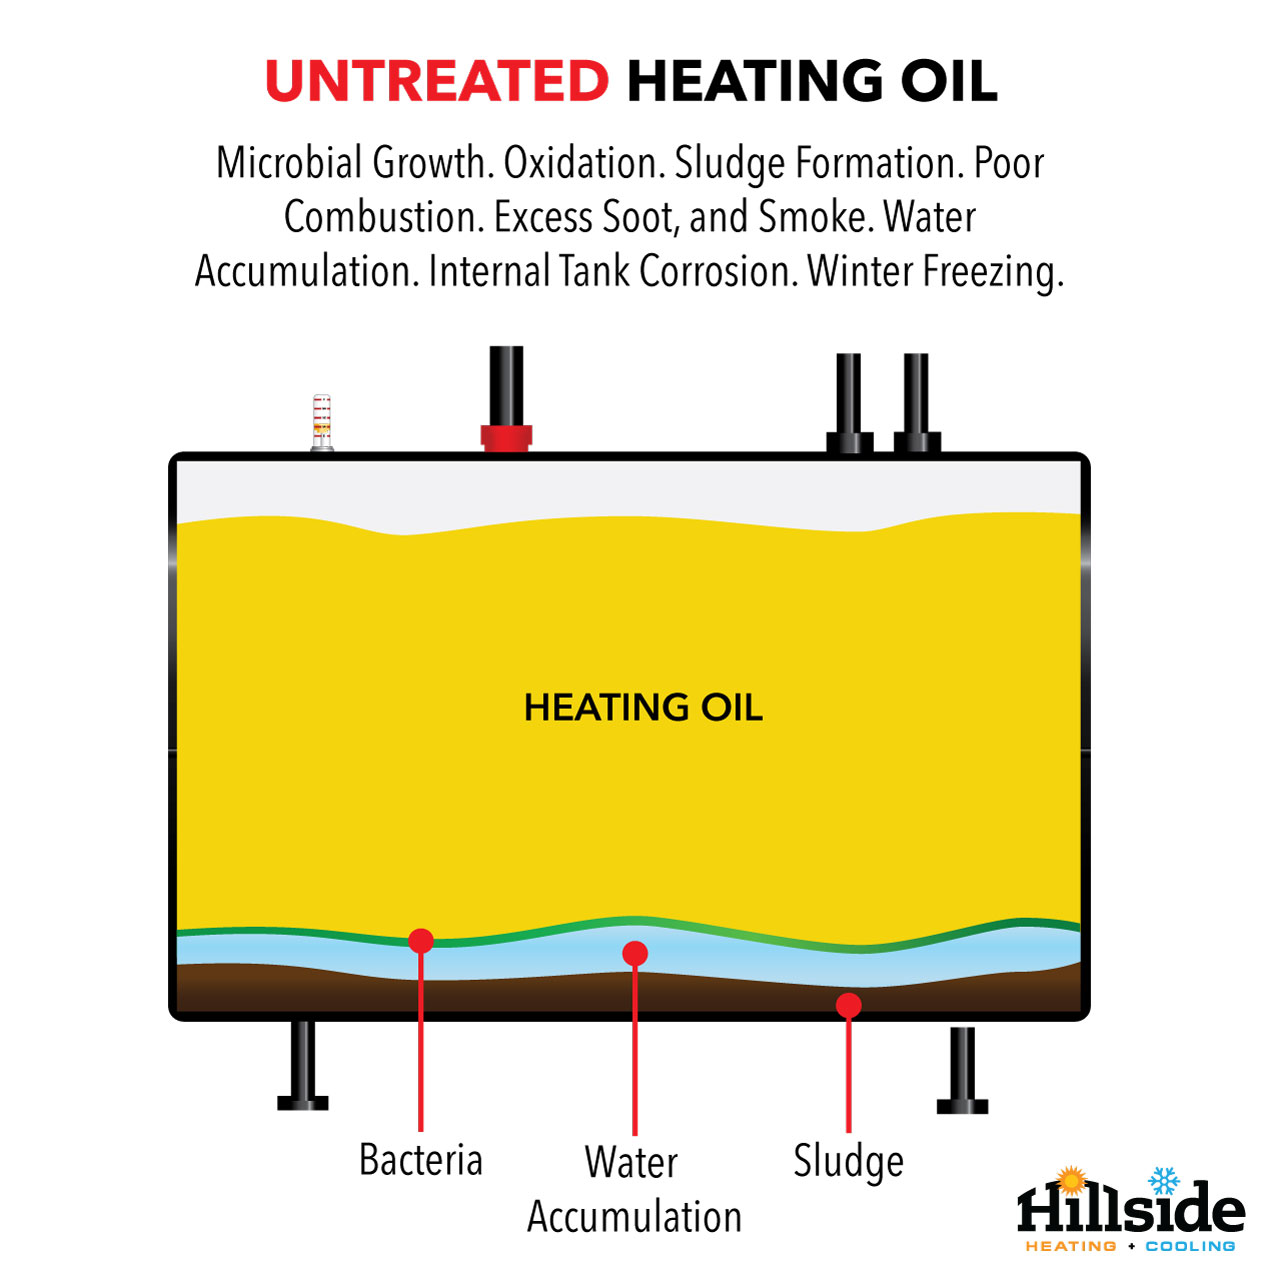 untreated fuel heating oil can cause many issues